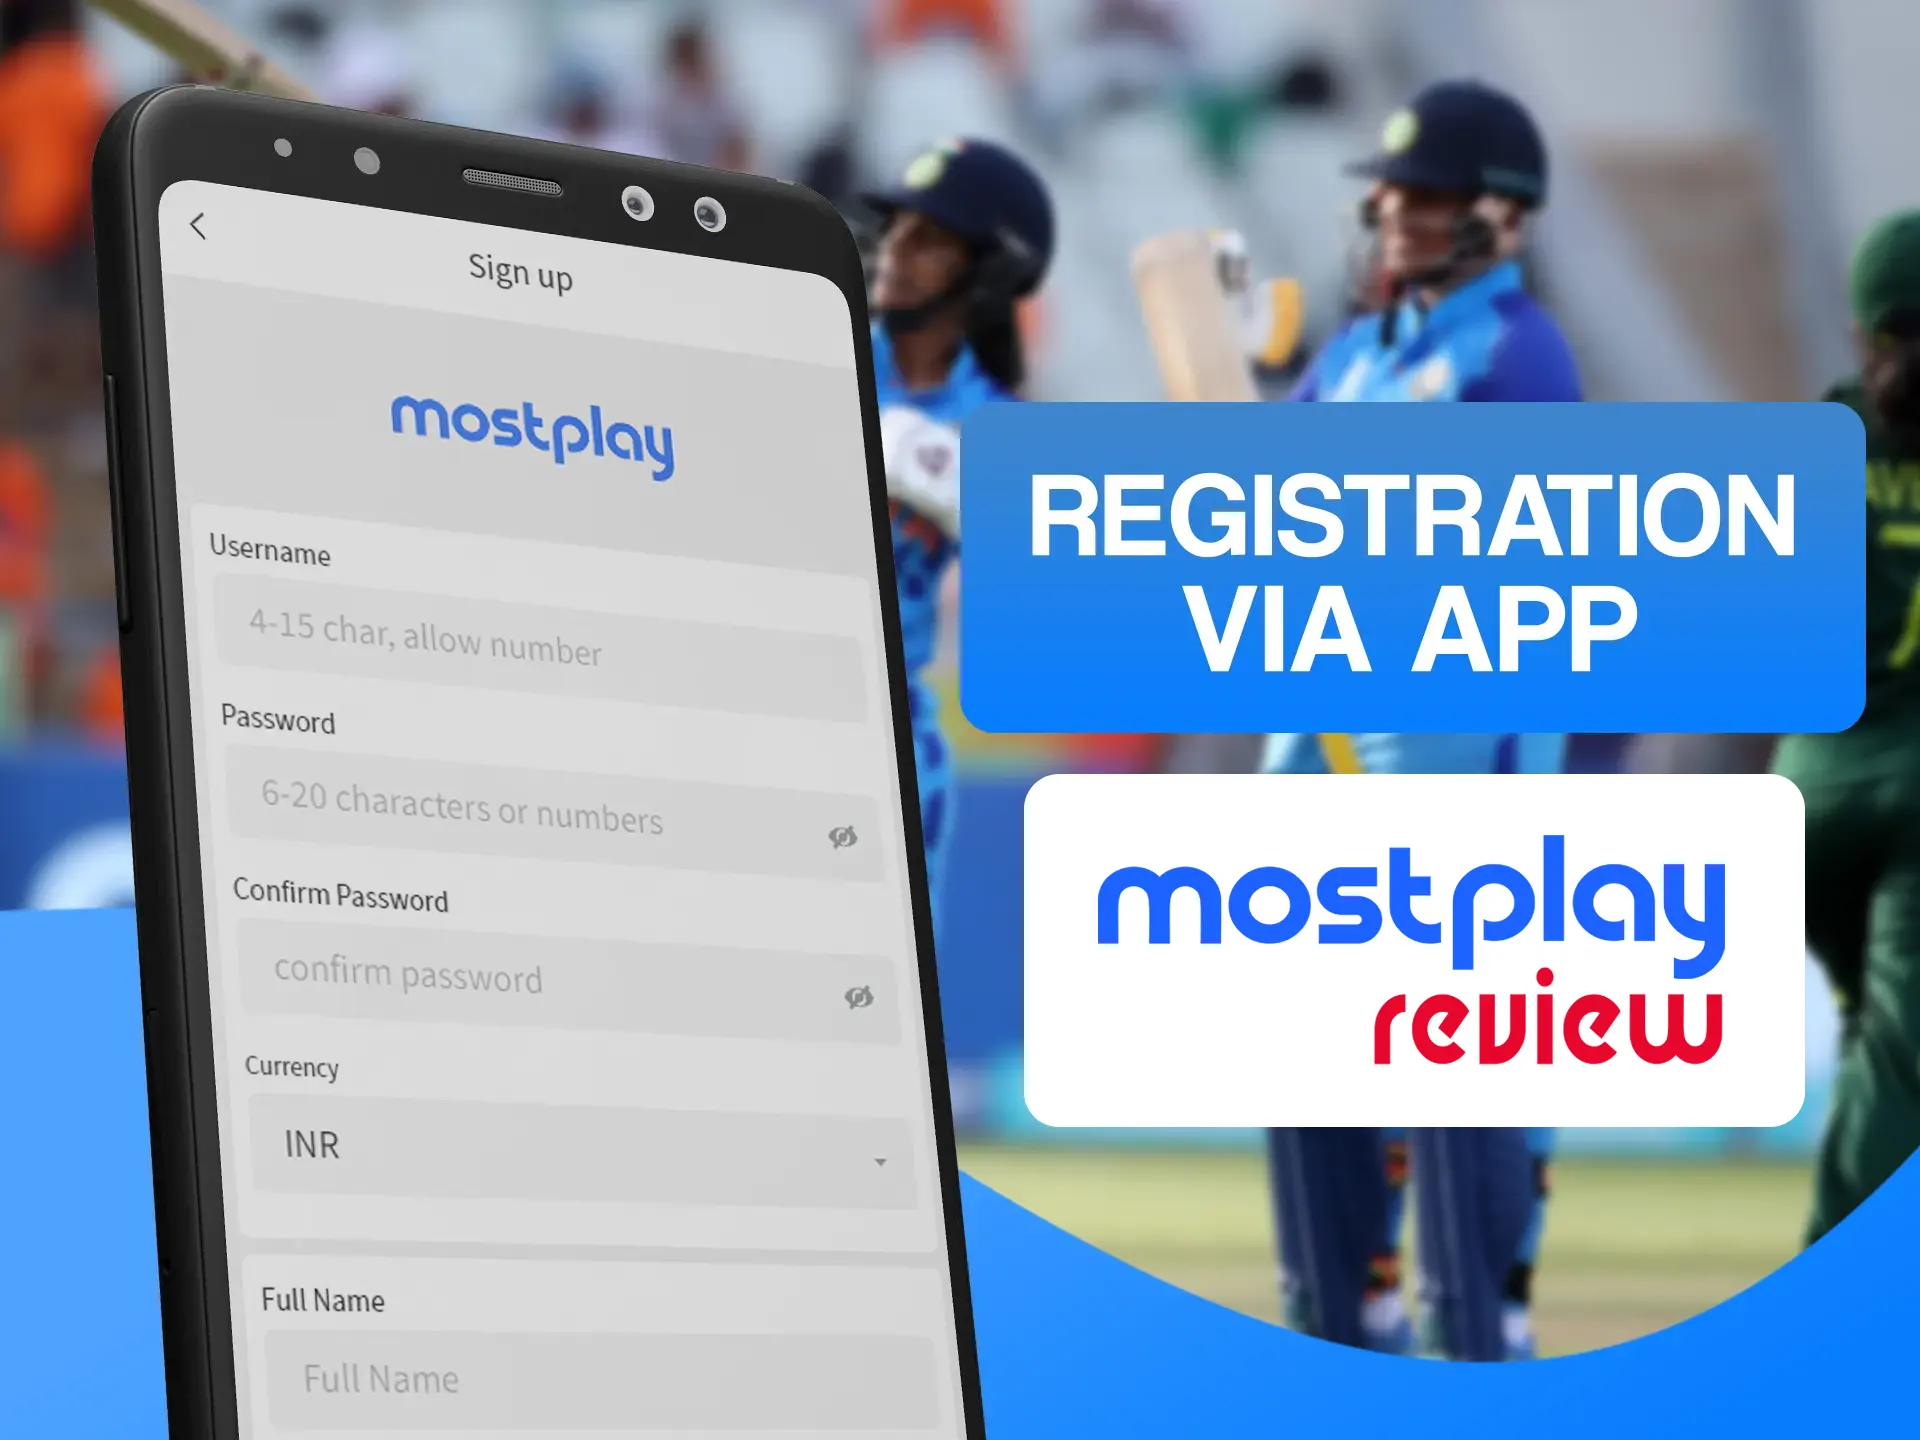 Register a new account in two steps using the Mostplay app.